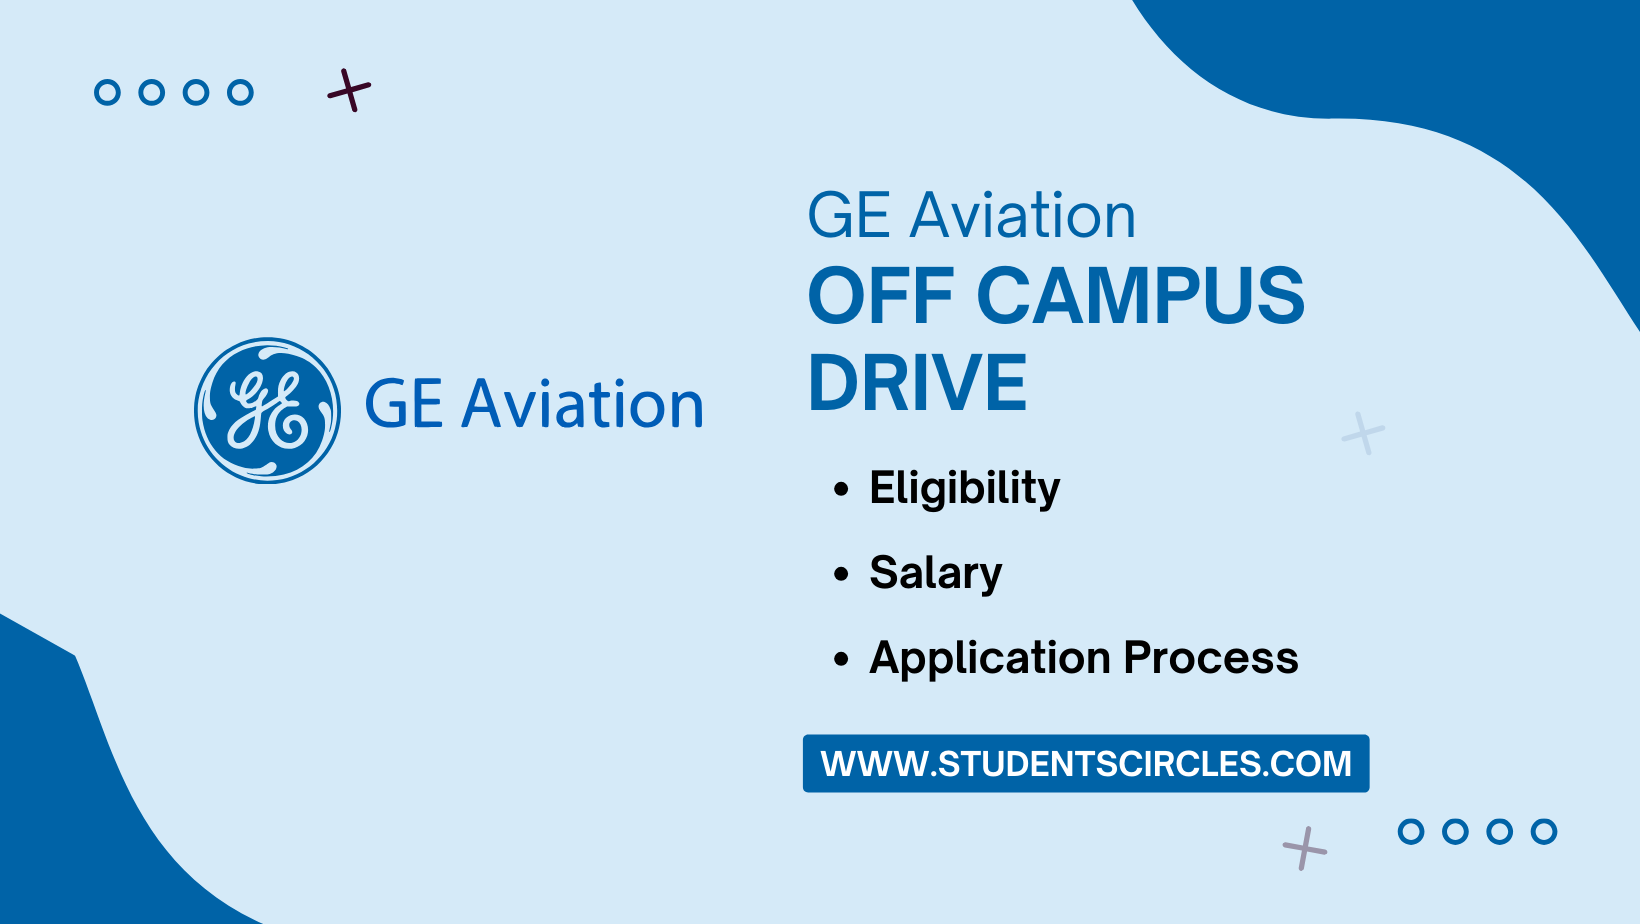 GE Aviation Off Campus Drive